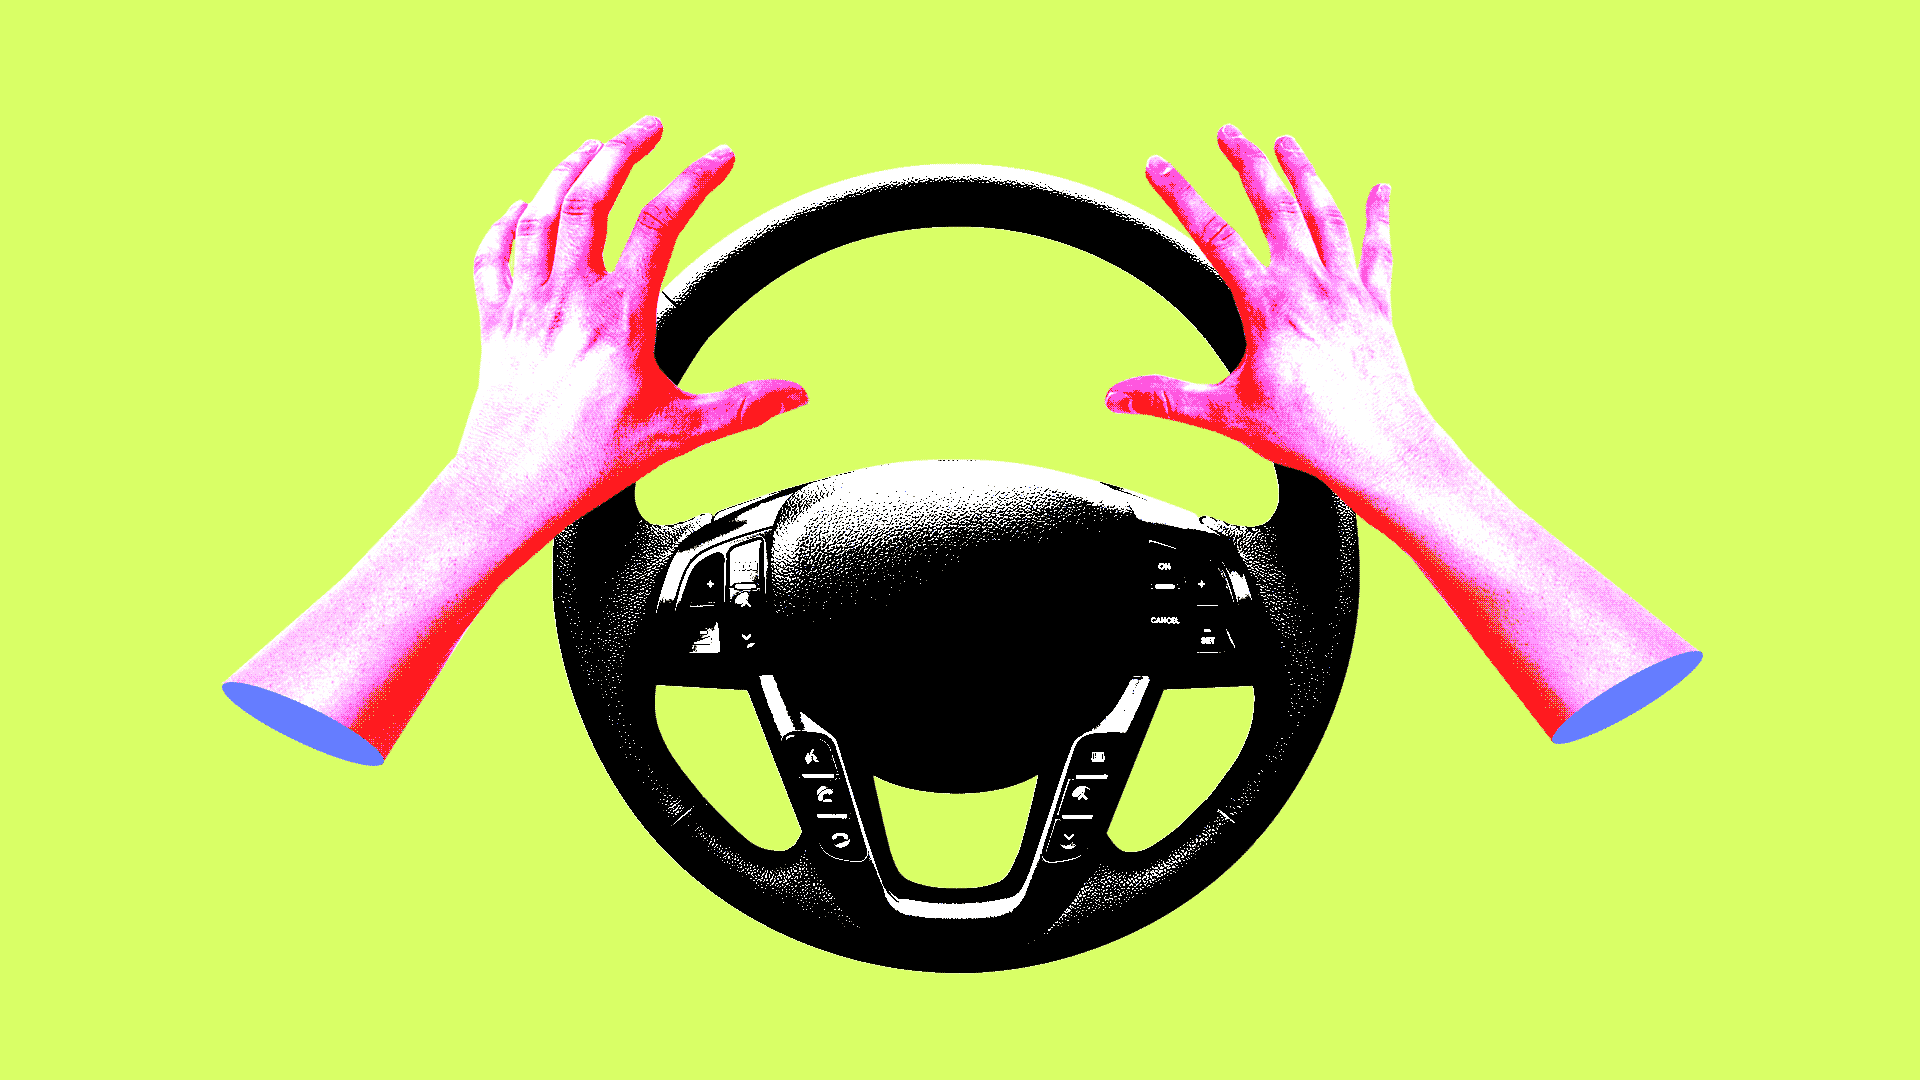 Illustration of hands inching away from a steering wheel